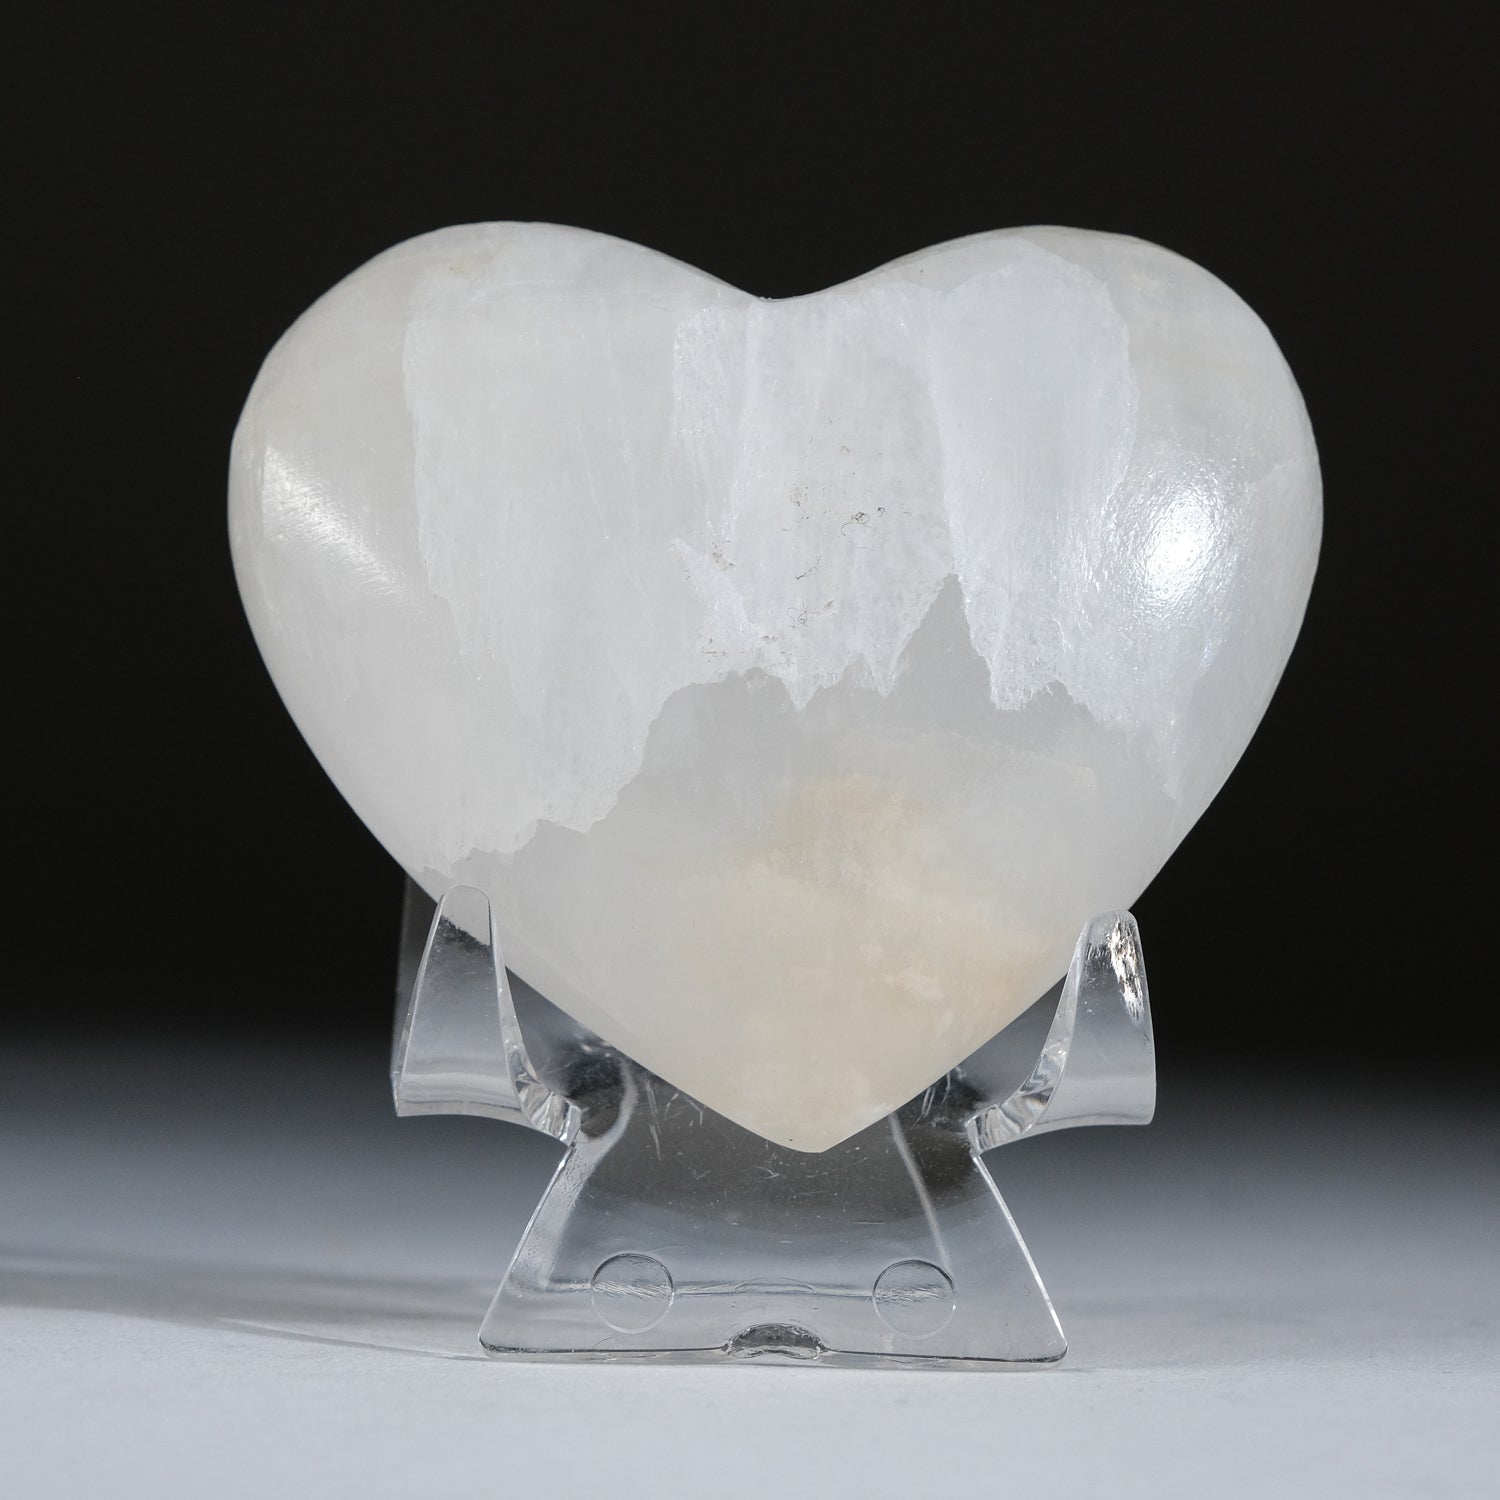 Genuine Polished White Onyx Heart from Mexico